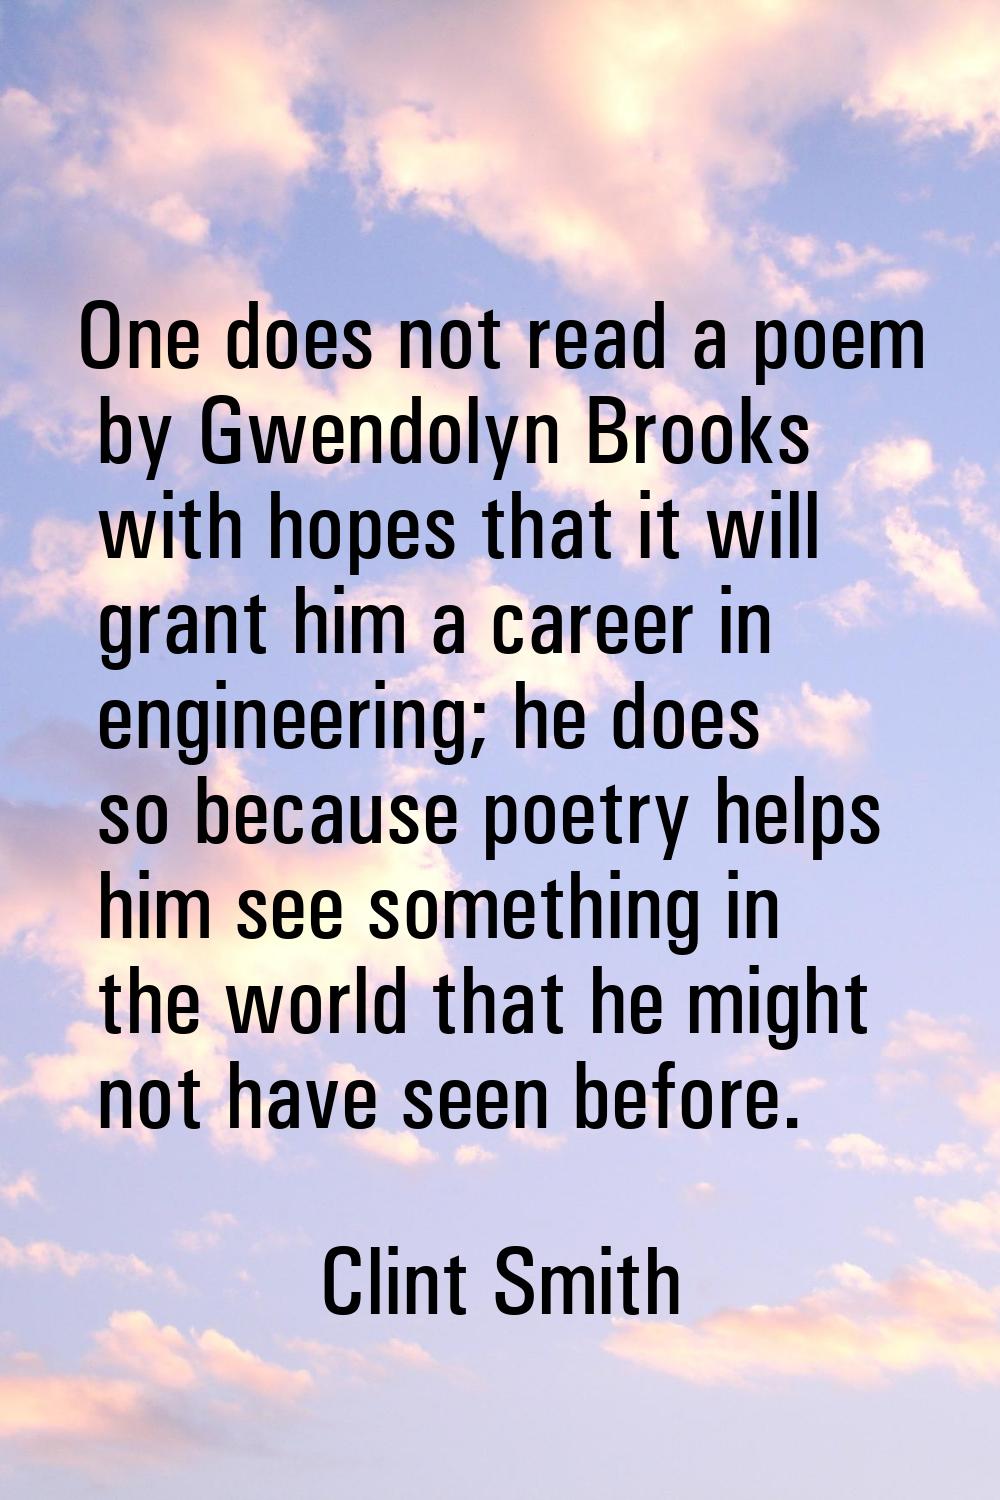 One does not read a poem by Gwendolyn Brooks with hopes that it will grant him a career in engineer